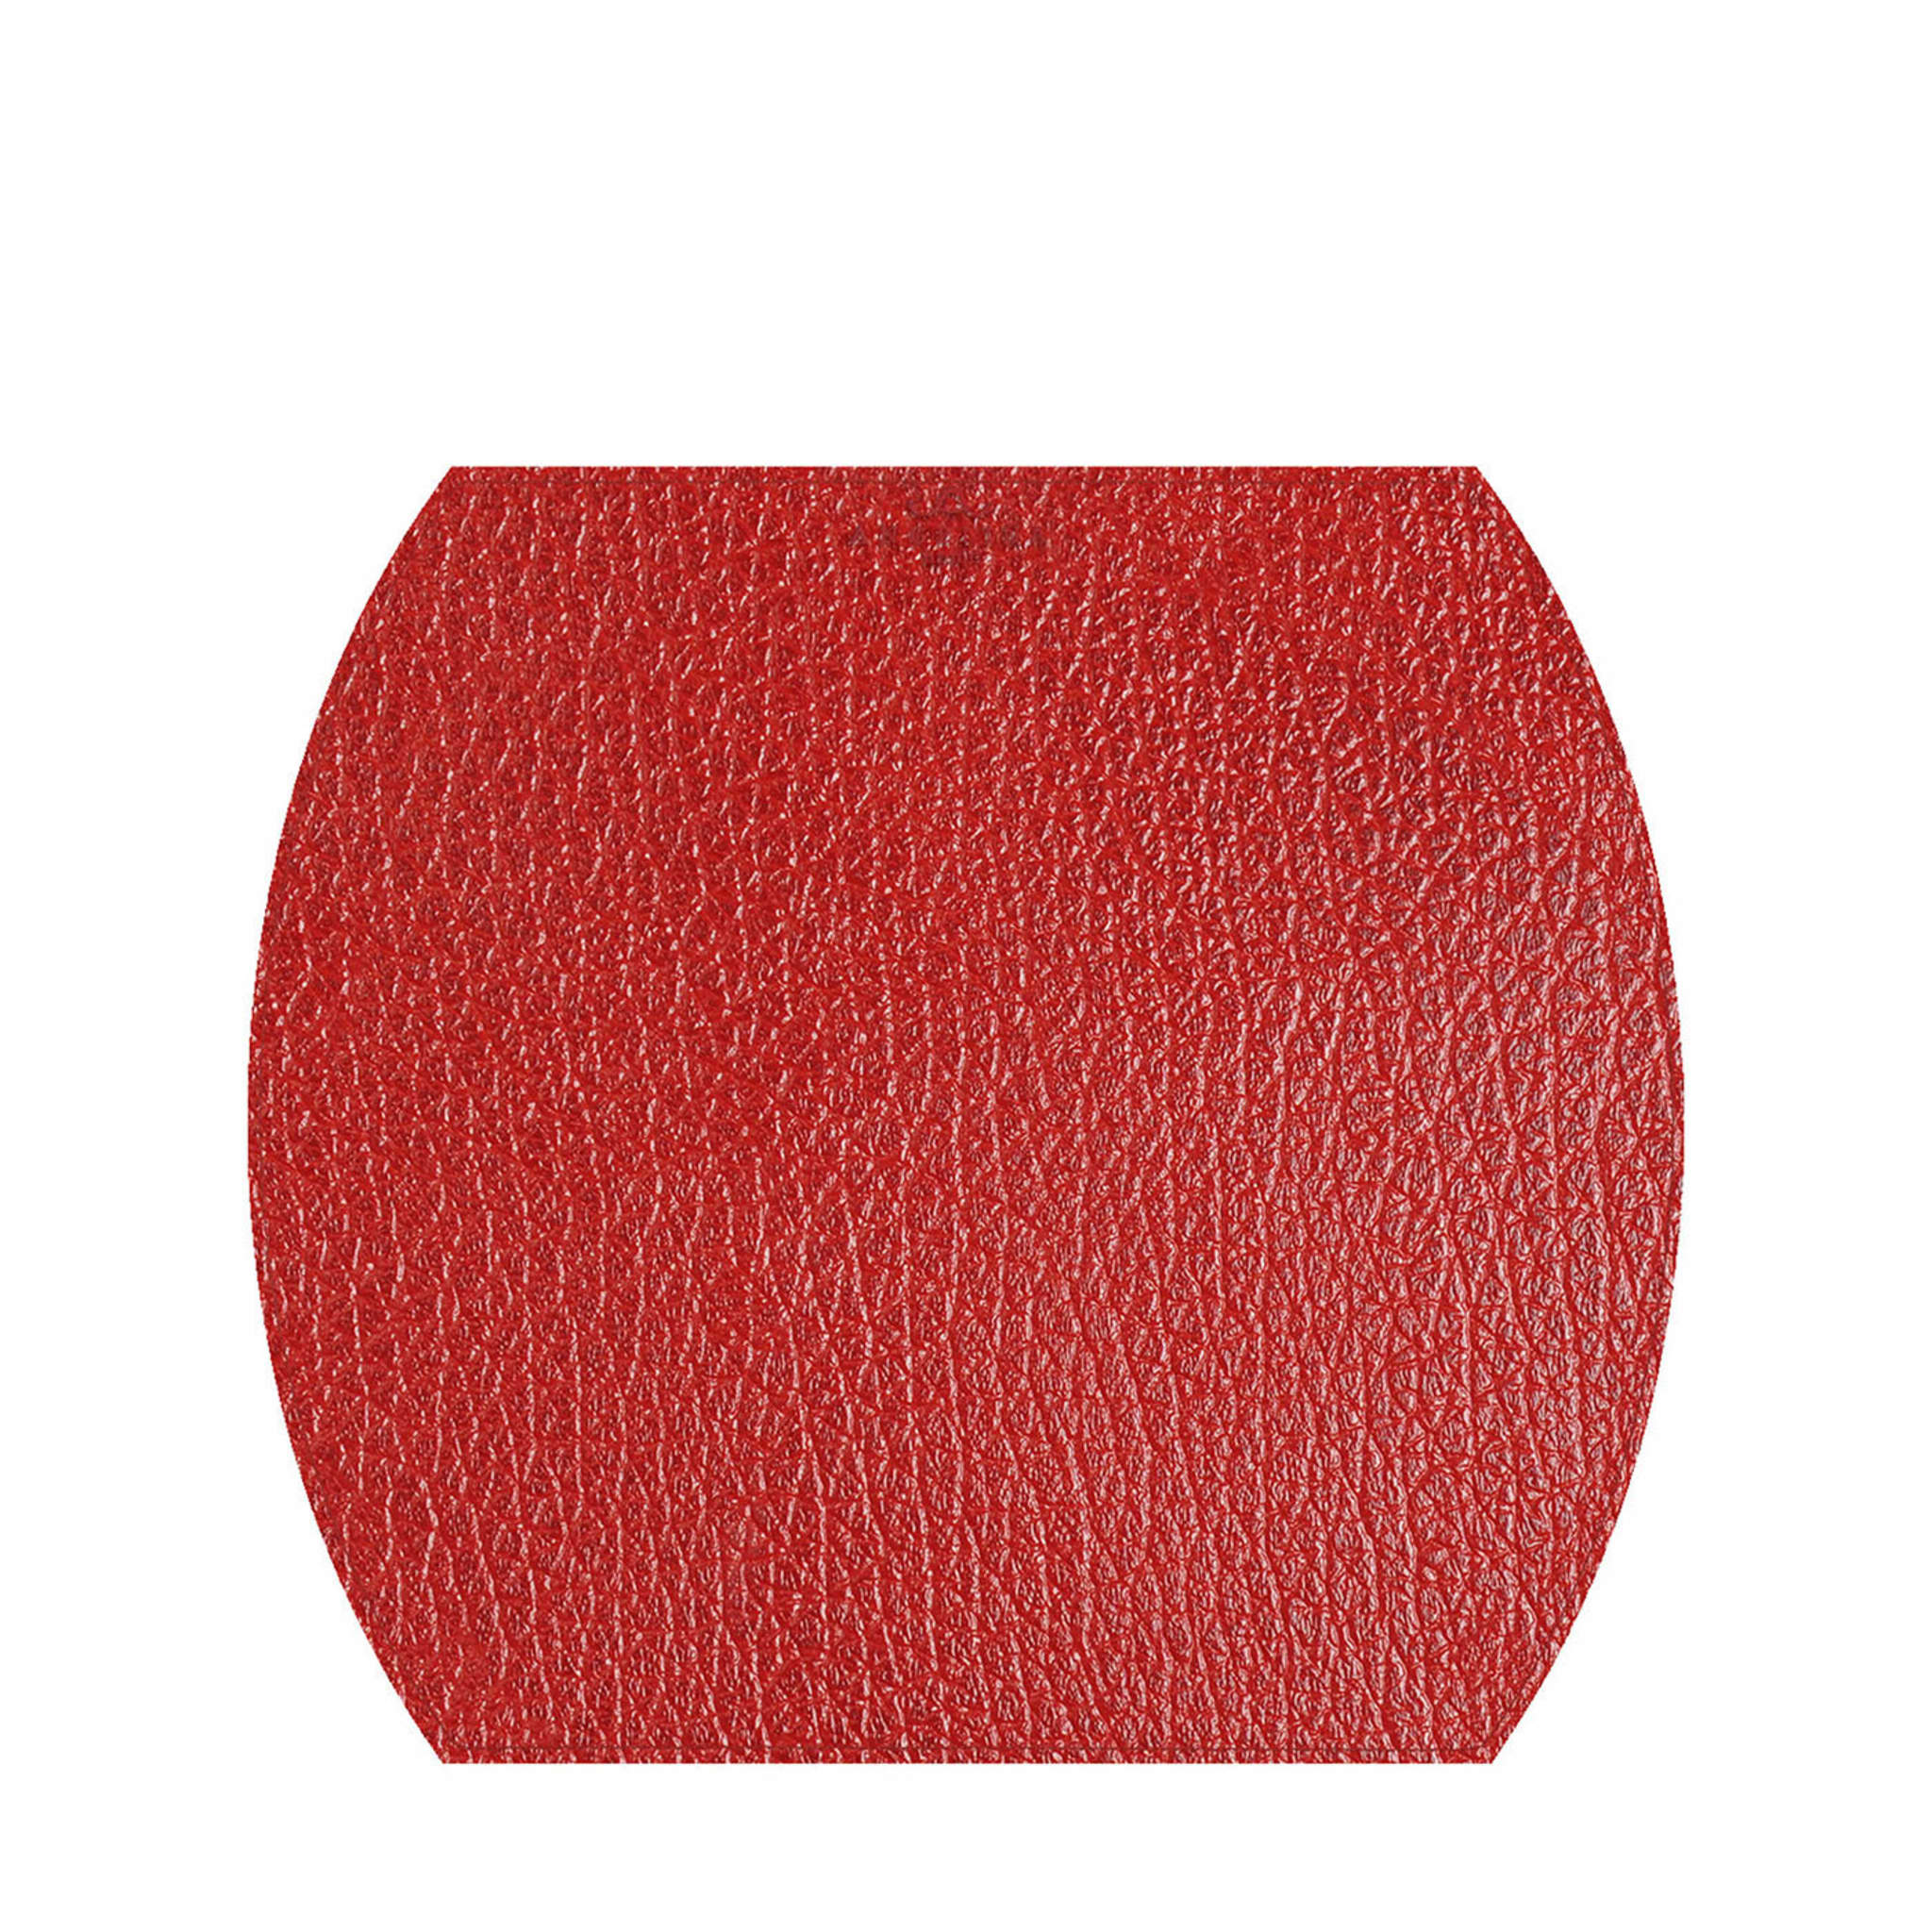 Tanzania Extra-Small Set of 2 Red Leather Placemats - Alternative view 3